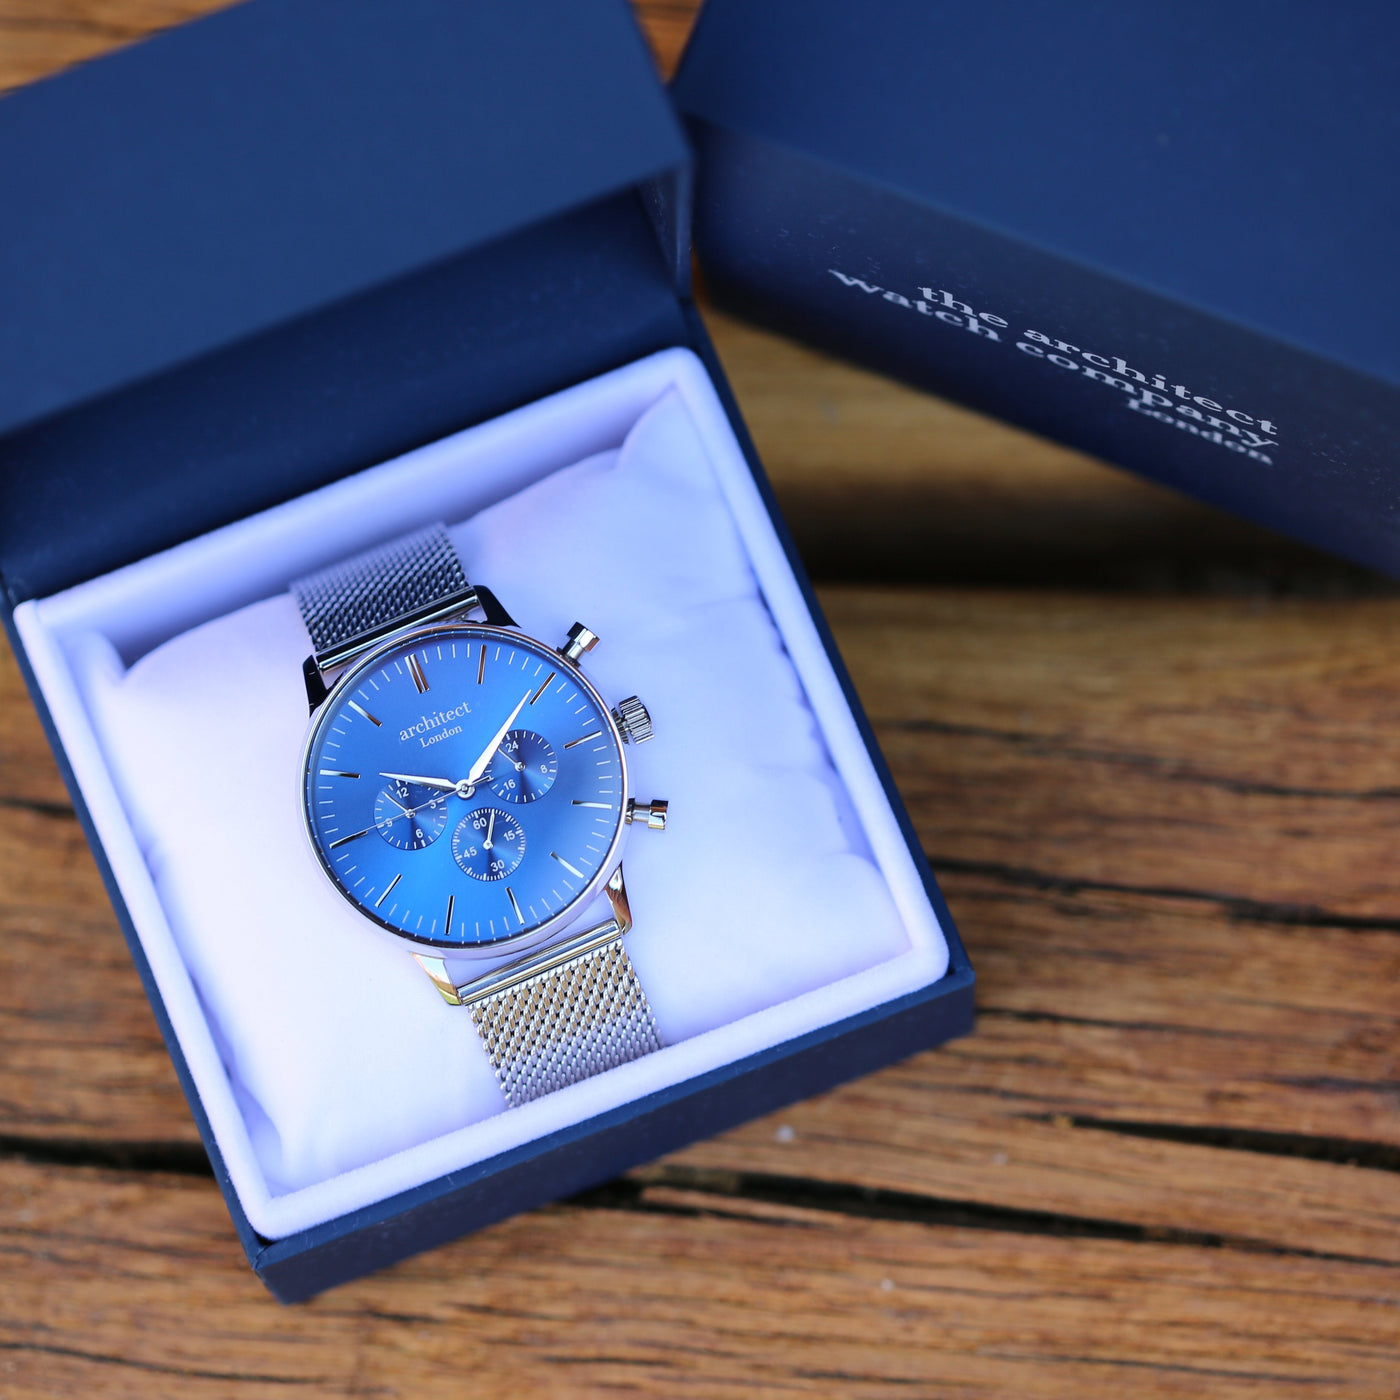 Handwriting Engraving - Mens Architect Motivator Watch Blue Face Silver Strap